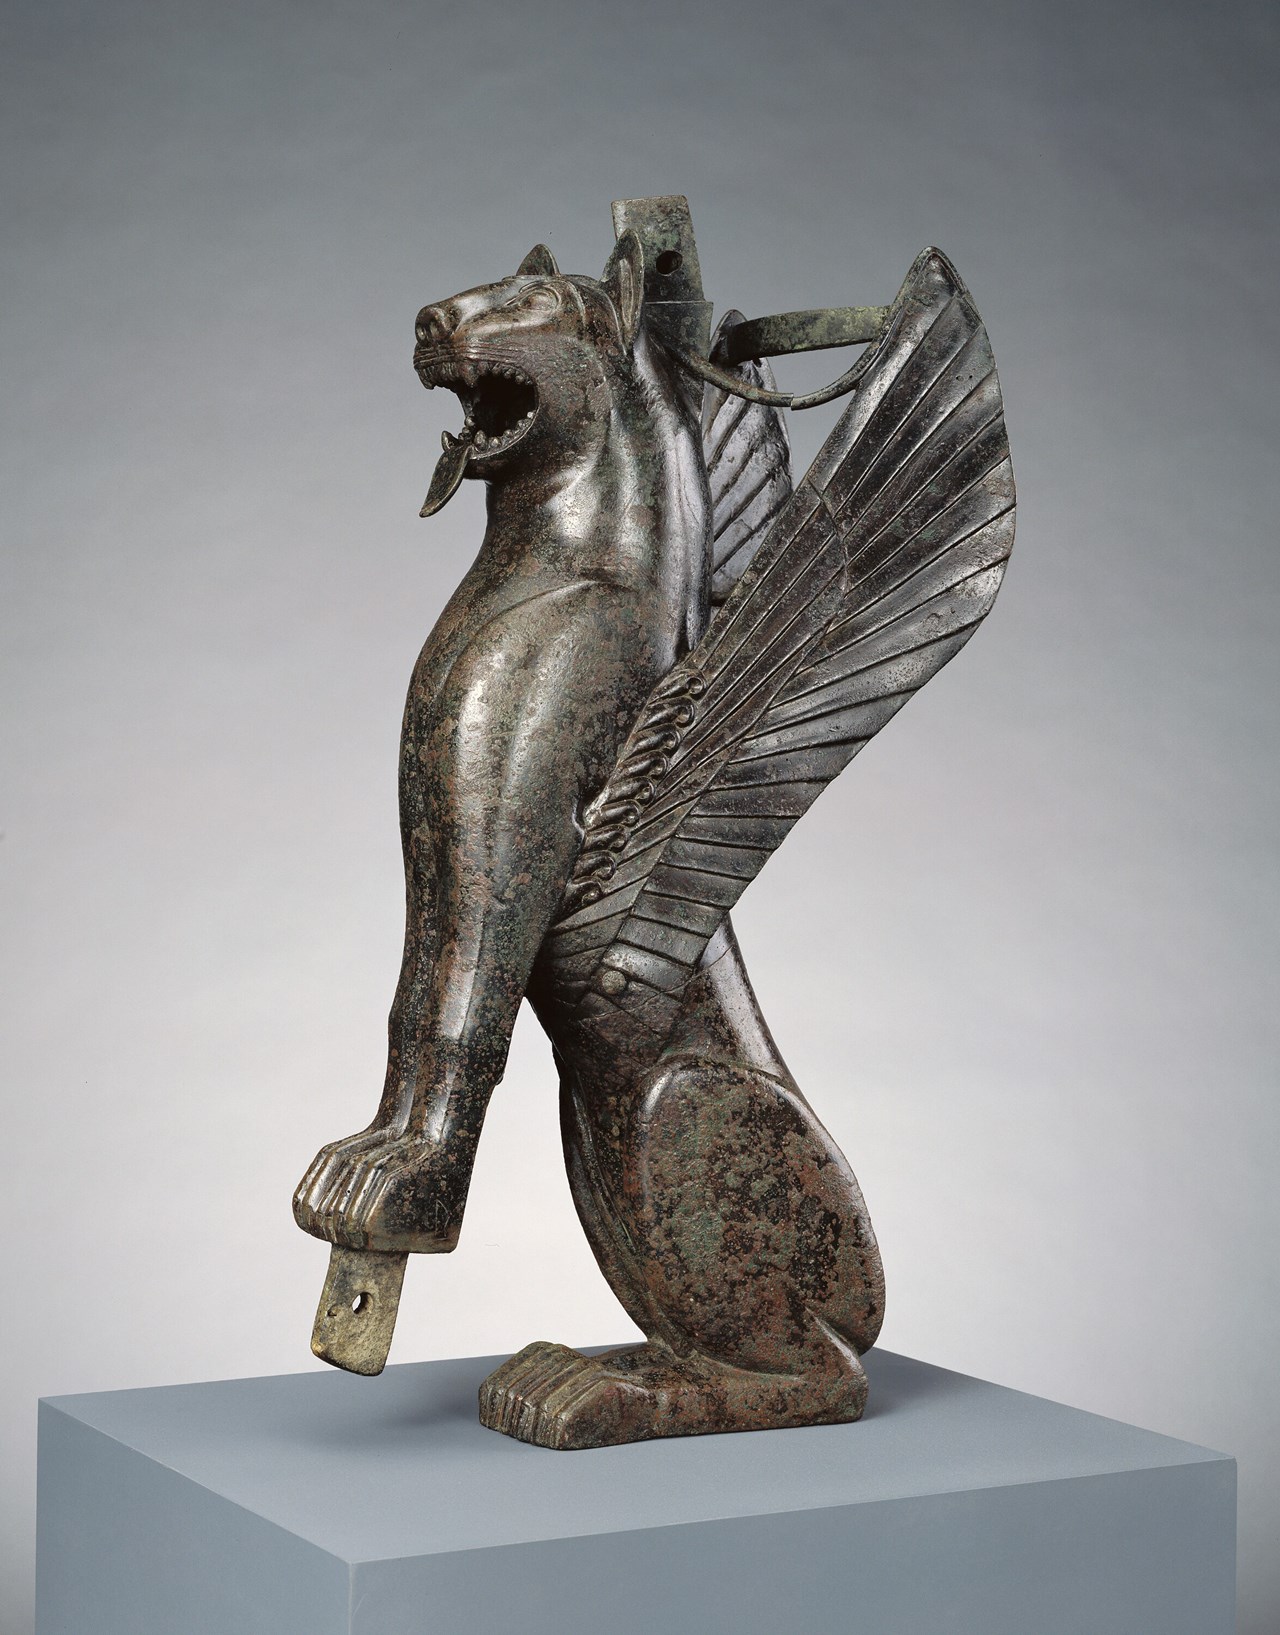 This winged feline originally served as the front leg of a wooden chair or throne. Felines were popular in the art of many Mediterranean and Near Eastern cultures. Certain stylistic features of this piece, as well as the manner in which it was made from separate pieces of bronze joined together, suggest that this work was created in Spain, specifically in the kingdom of Tartessos. The form of the feline's brow is a Tartessian characteristic, as is the triangle design in the creature's ear. https://www.getty.edu/art/collection/object/103TQK